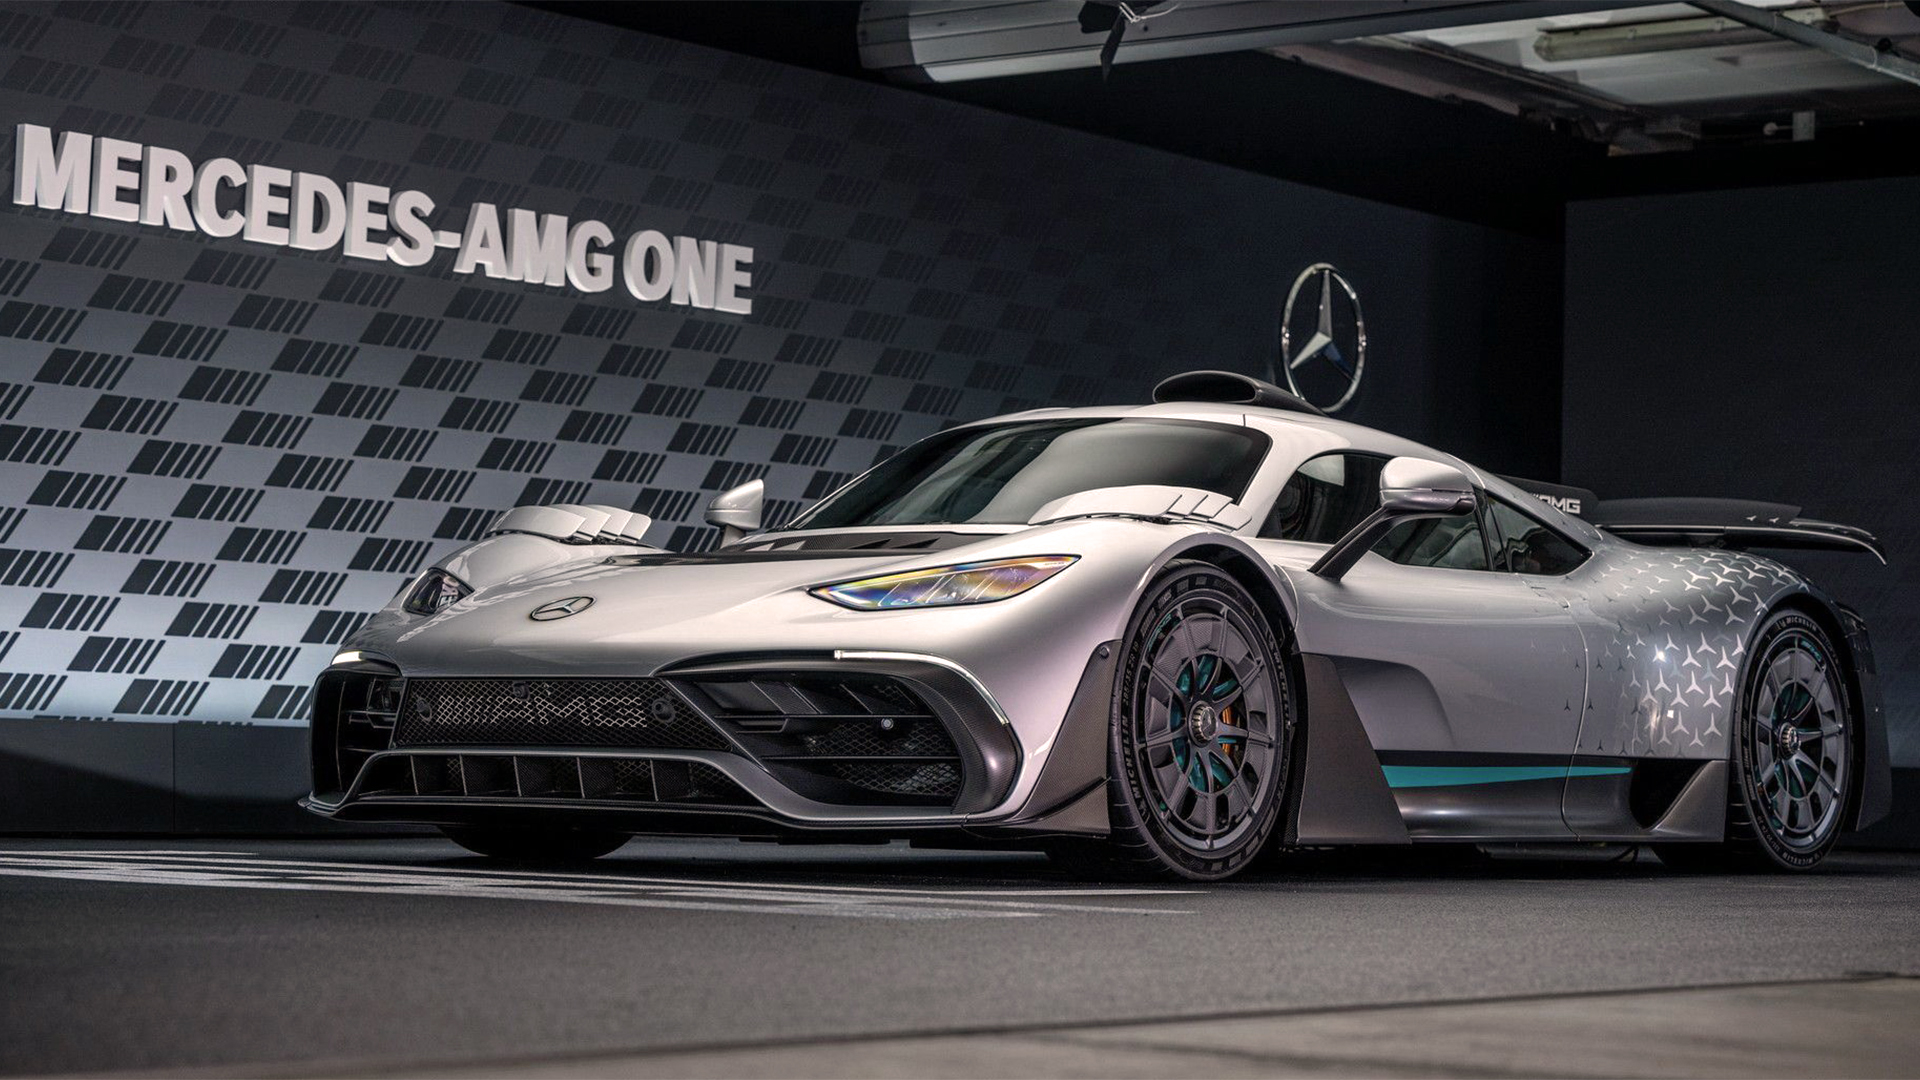 There will be only 275 units of the Mercedes-AMG One. They are handcrafted in England but delivered to their owners in Germany